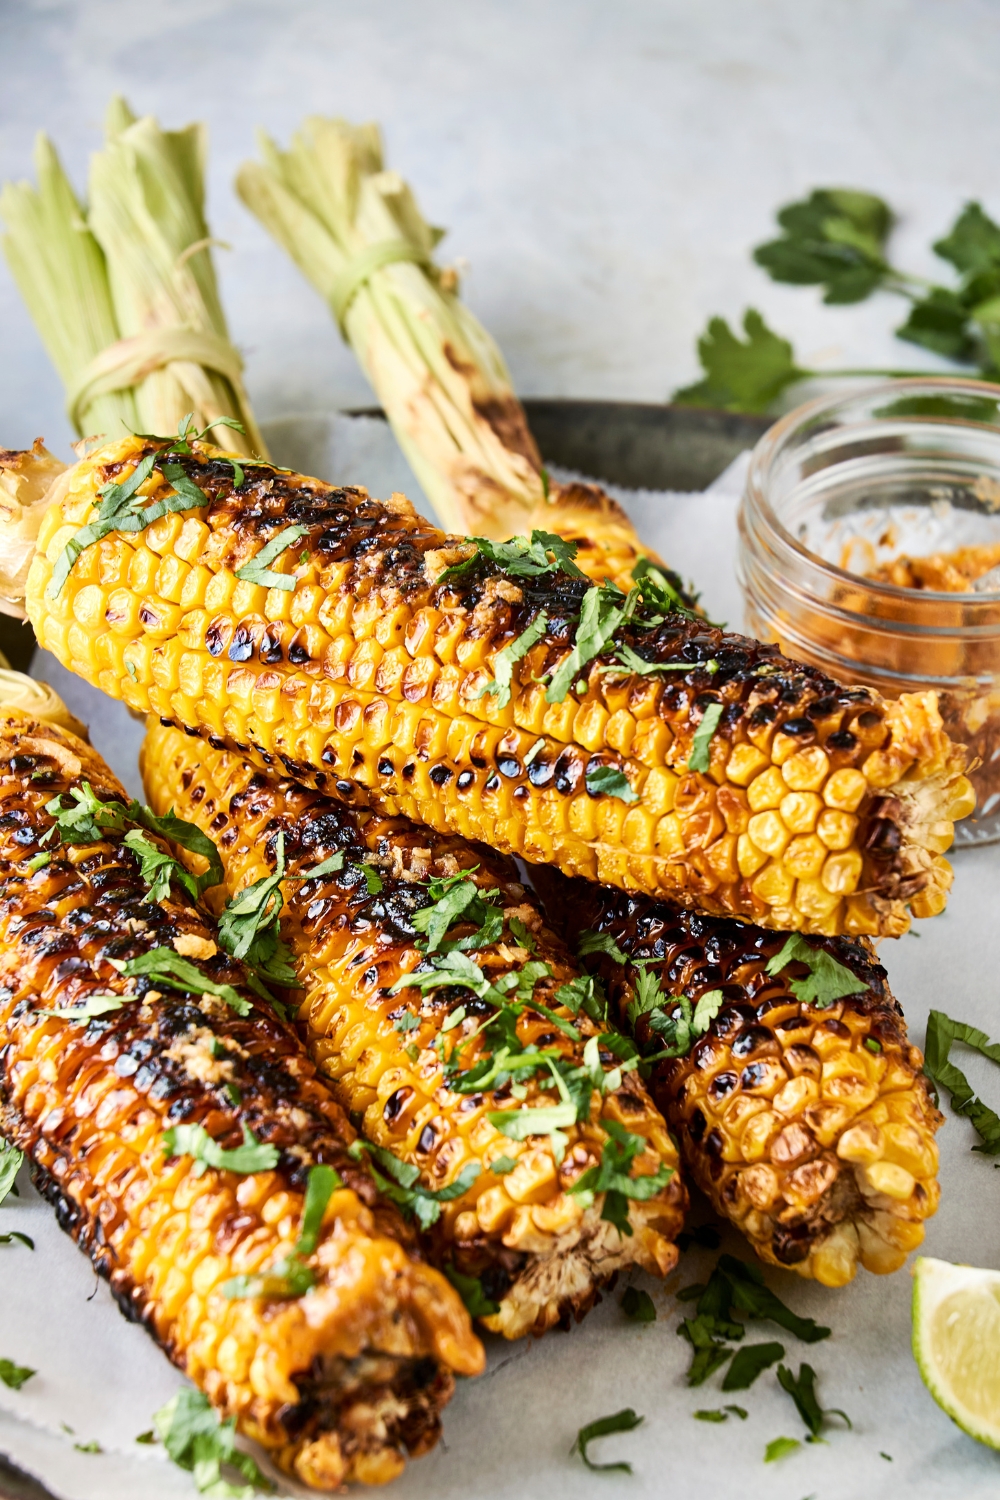 Four ears of corn are on a serving plate. They have been garnished with fresh chopped cilantro.